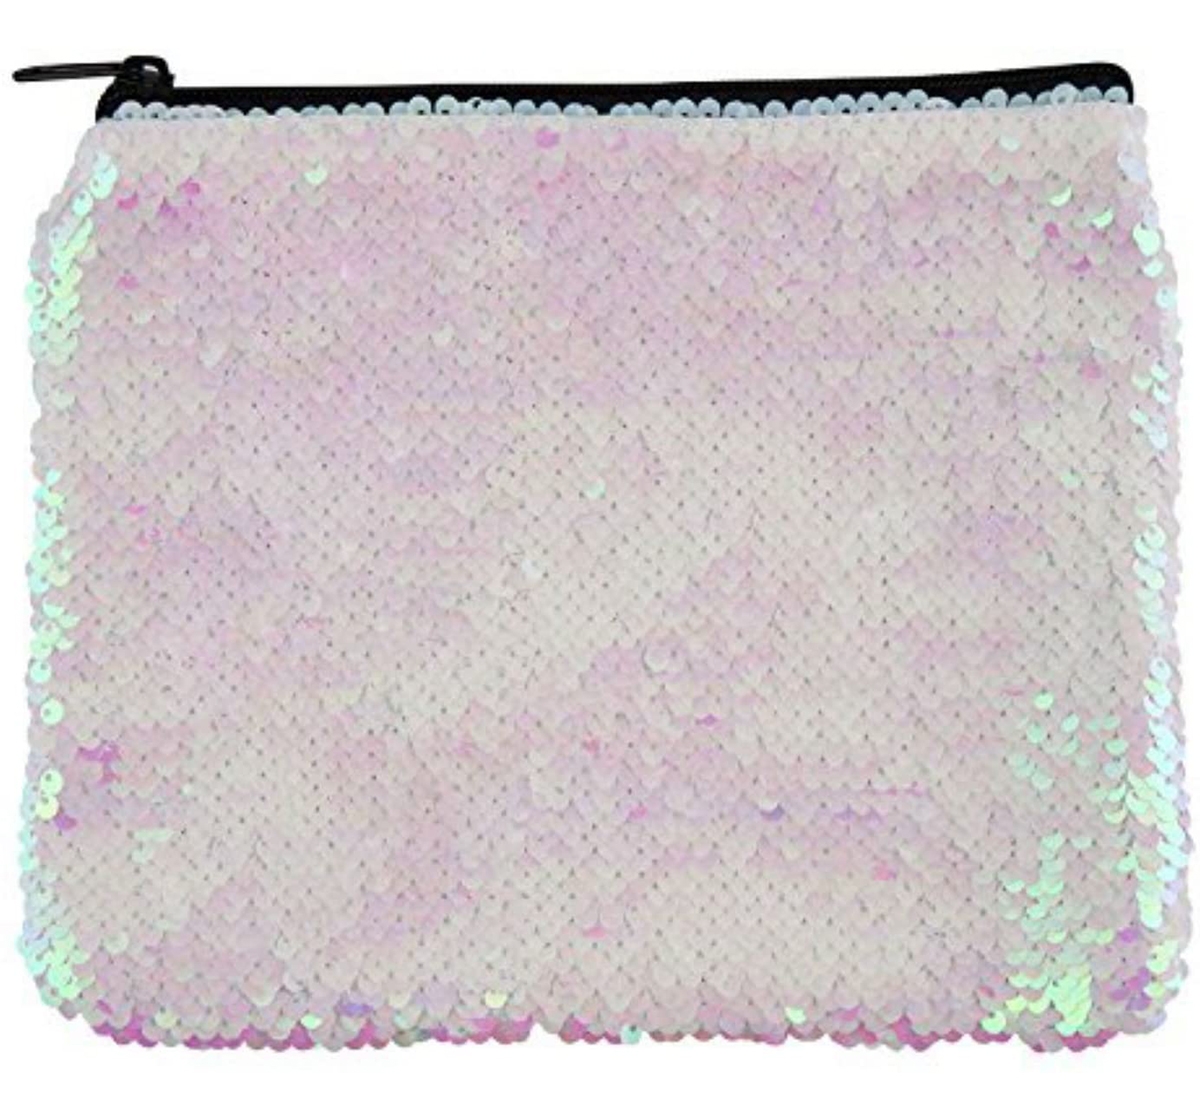 Fashion Angels | Fashion Angels S.Lab Sequin Pouch Pink Iridescent Pencil Pouches & Boxes for Girls age 6Y+ 0